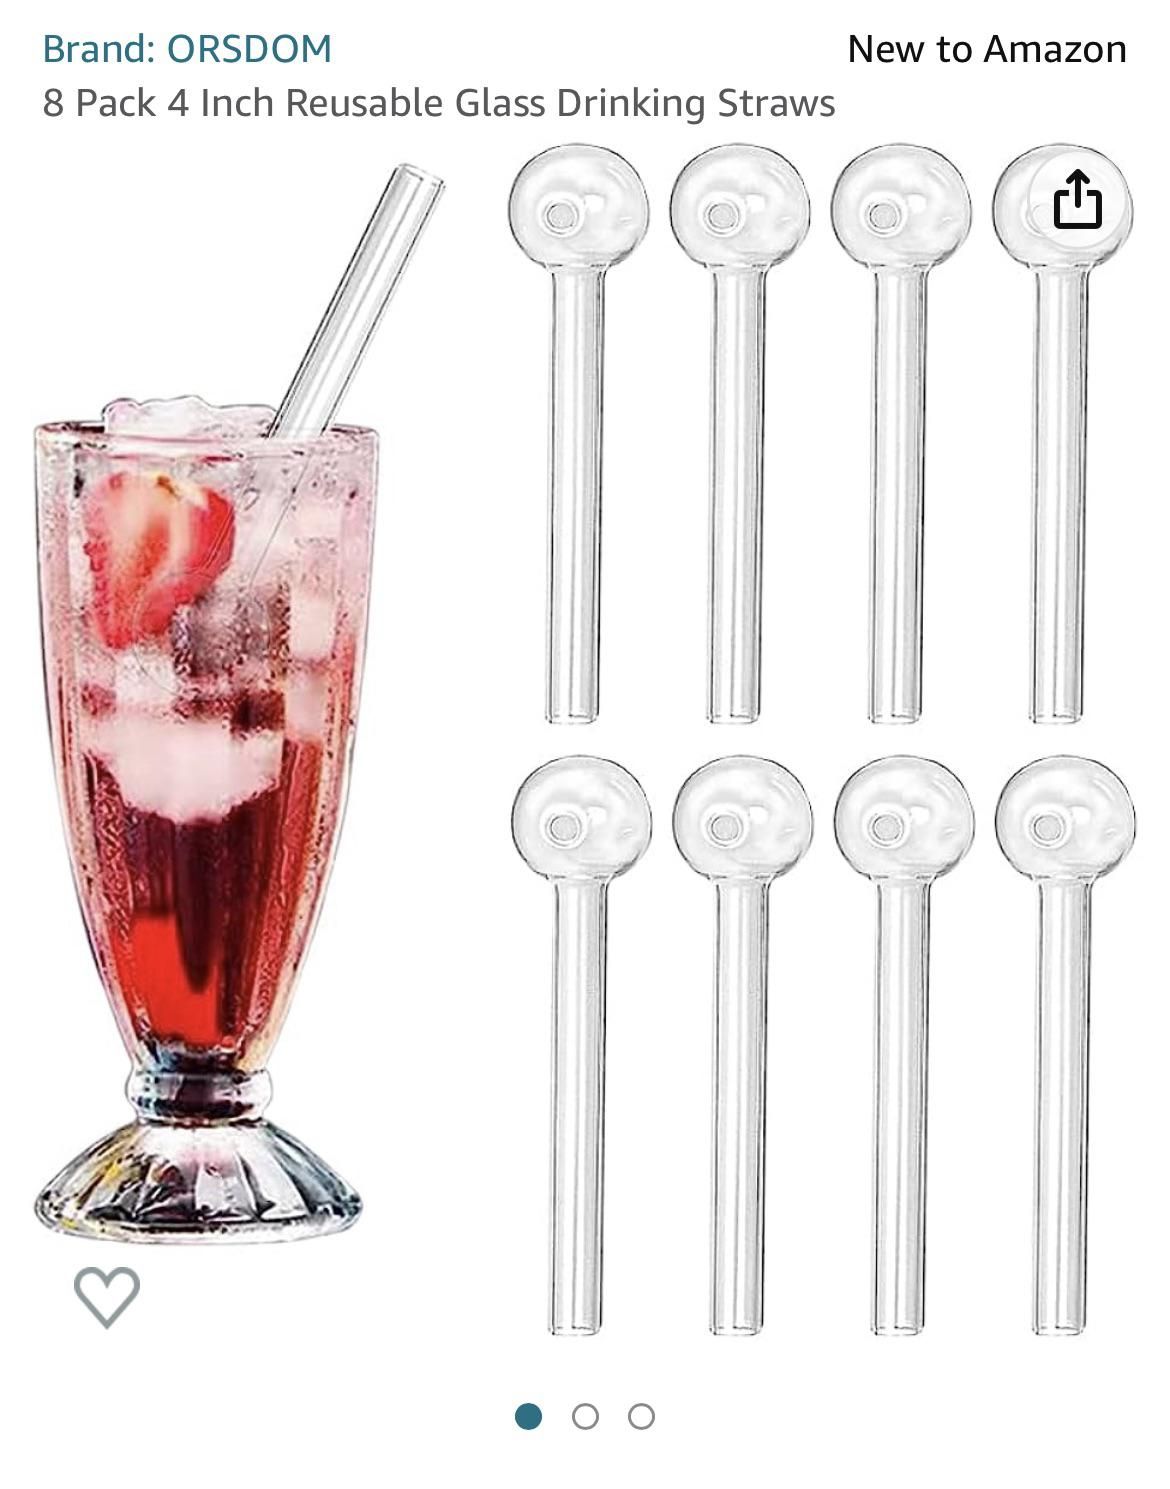 Reusable drinking straws, eh?